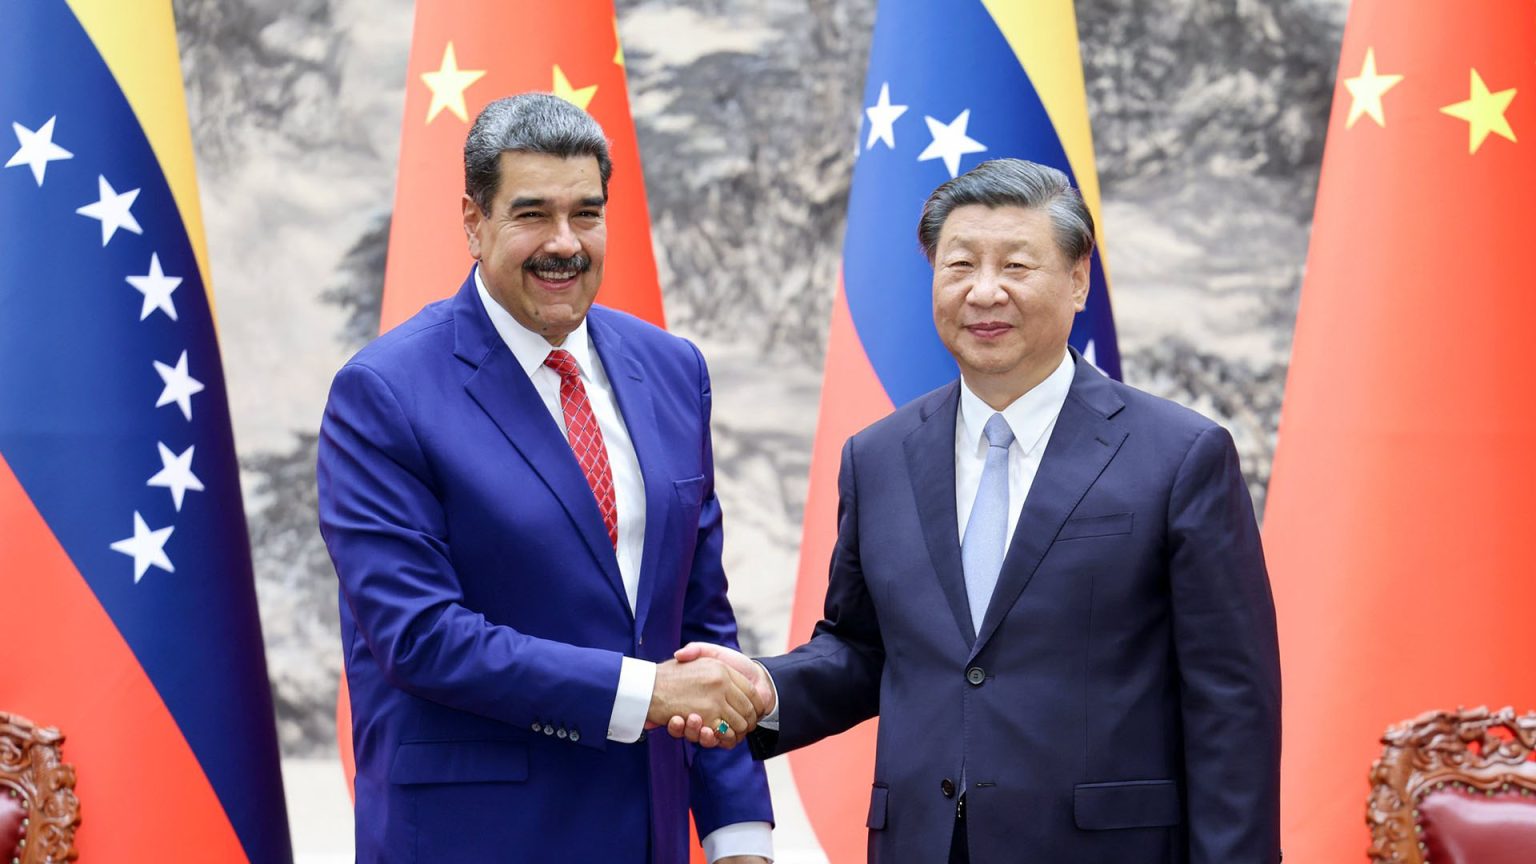 Venezuela's President Nicolás Maduro meets with China's President Xi Jinping in Beijing in September 2023. Photo: Geopolitical Economy/File photo.